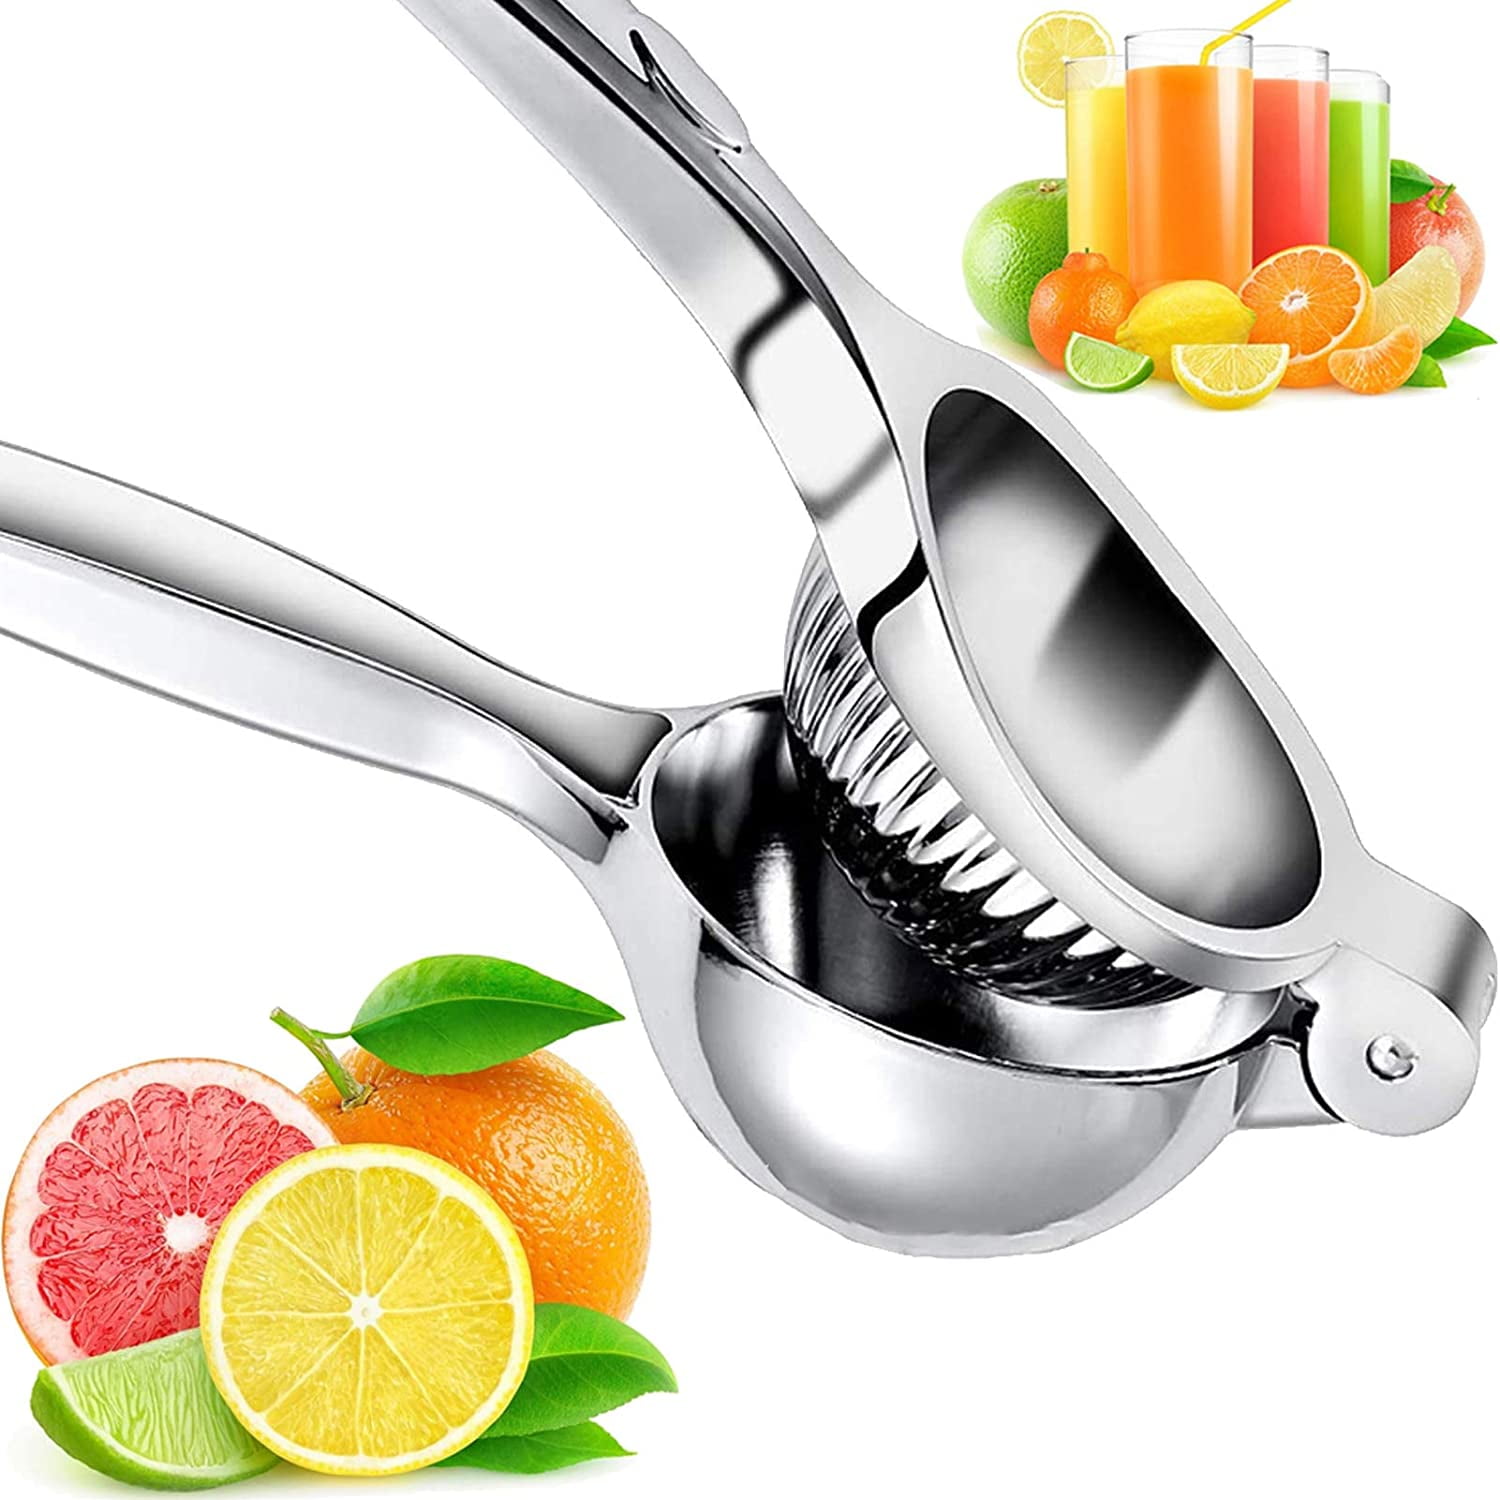 Aeon Design Metal Lemon Squeezer With 5 Pcs Lemon Covers-Portable And Non Slip Design Citrus Press Juicer-Lime Squeezer-With Lemon Wraps-Long Lasting And Dishwasher Safe-2.95x8.7 And 0.396lb-Yellow 